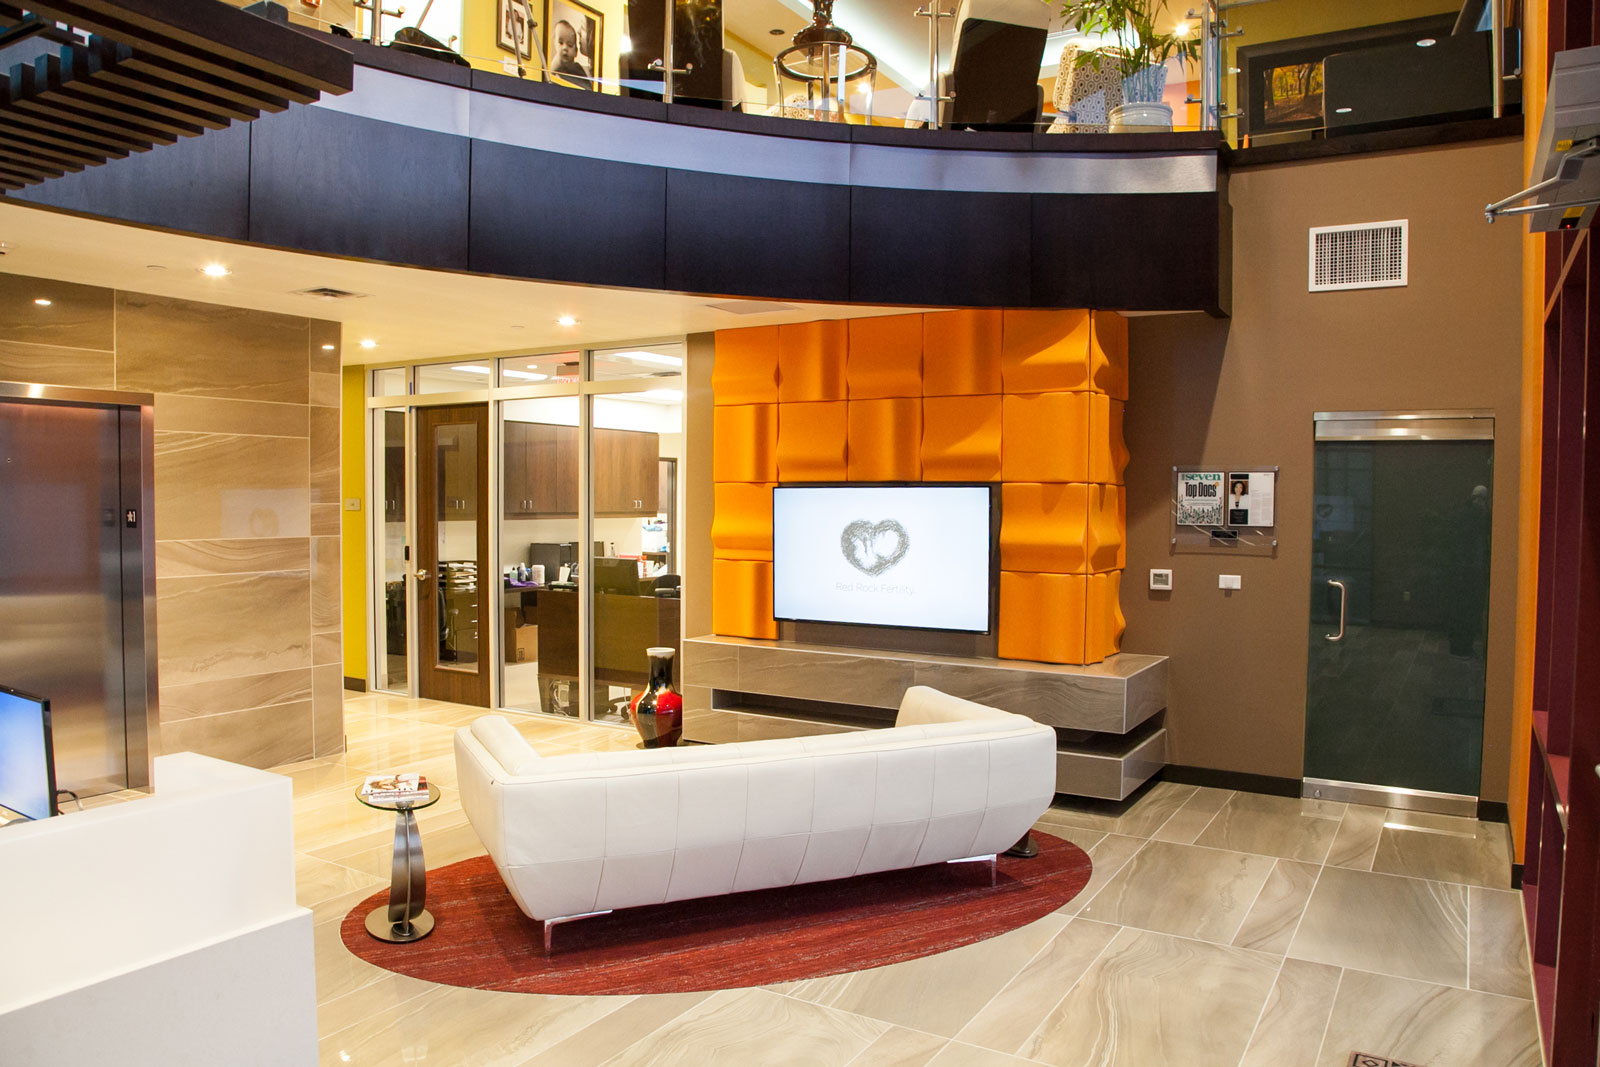 Lobby at Red Rock Fertility Center.